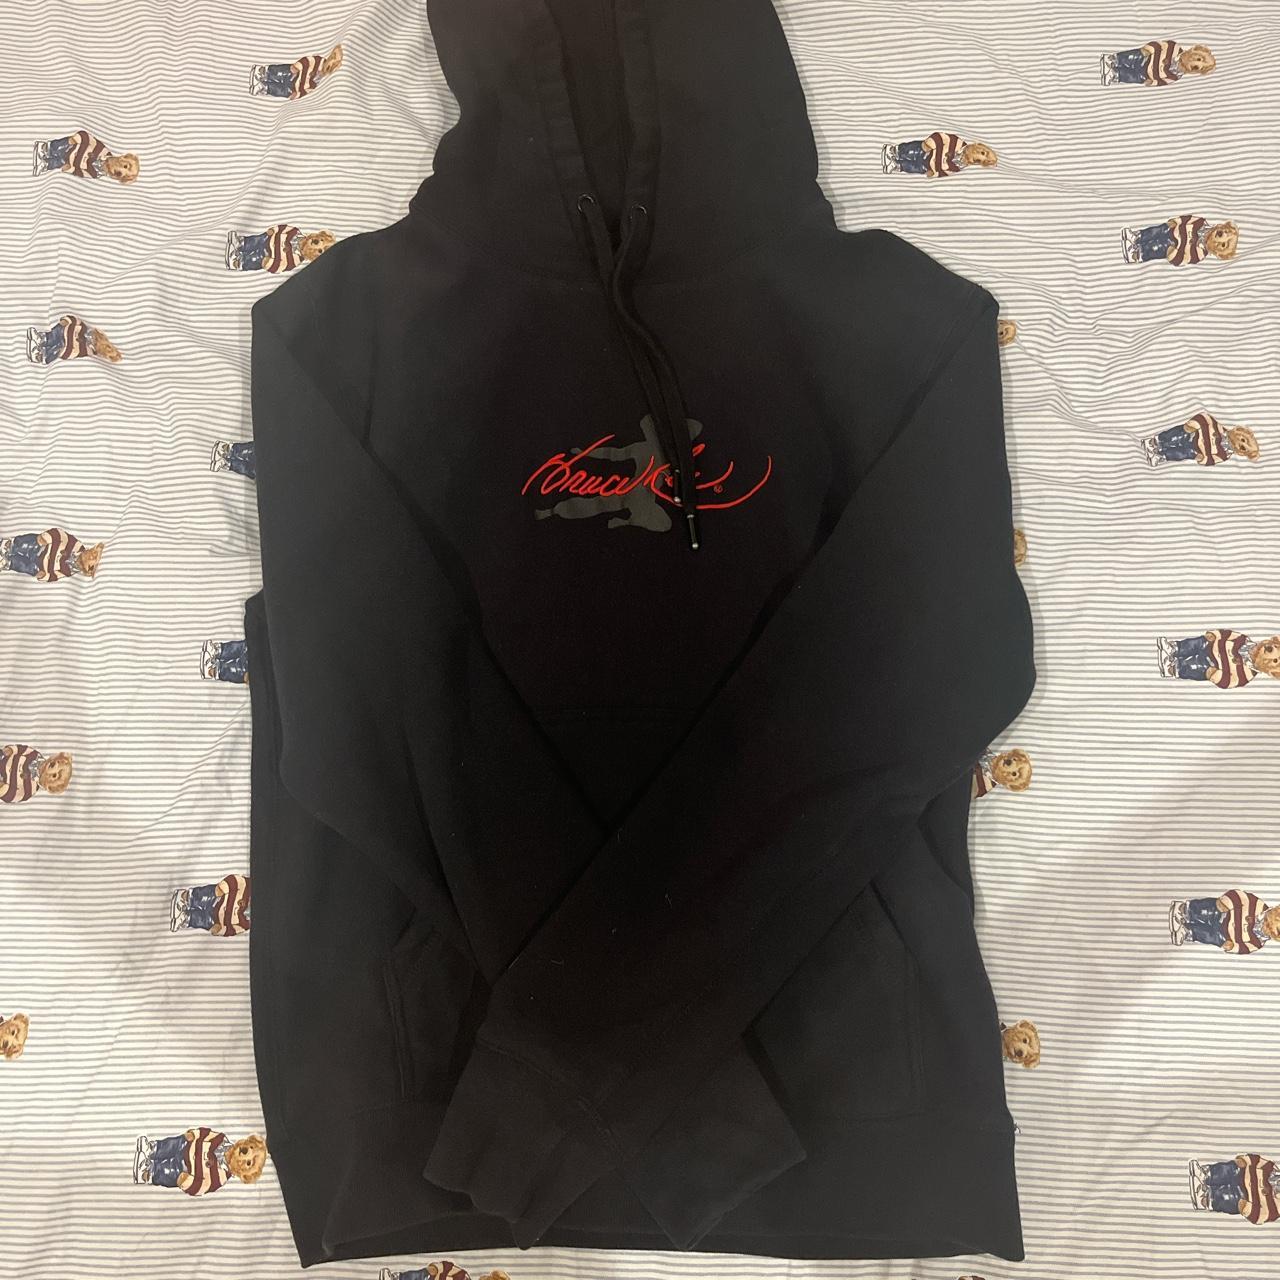 Bruce Lee black hoodie bought at Shoe Palace in